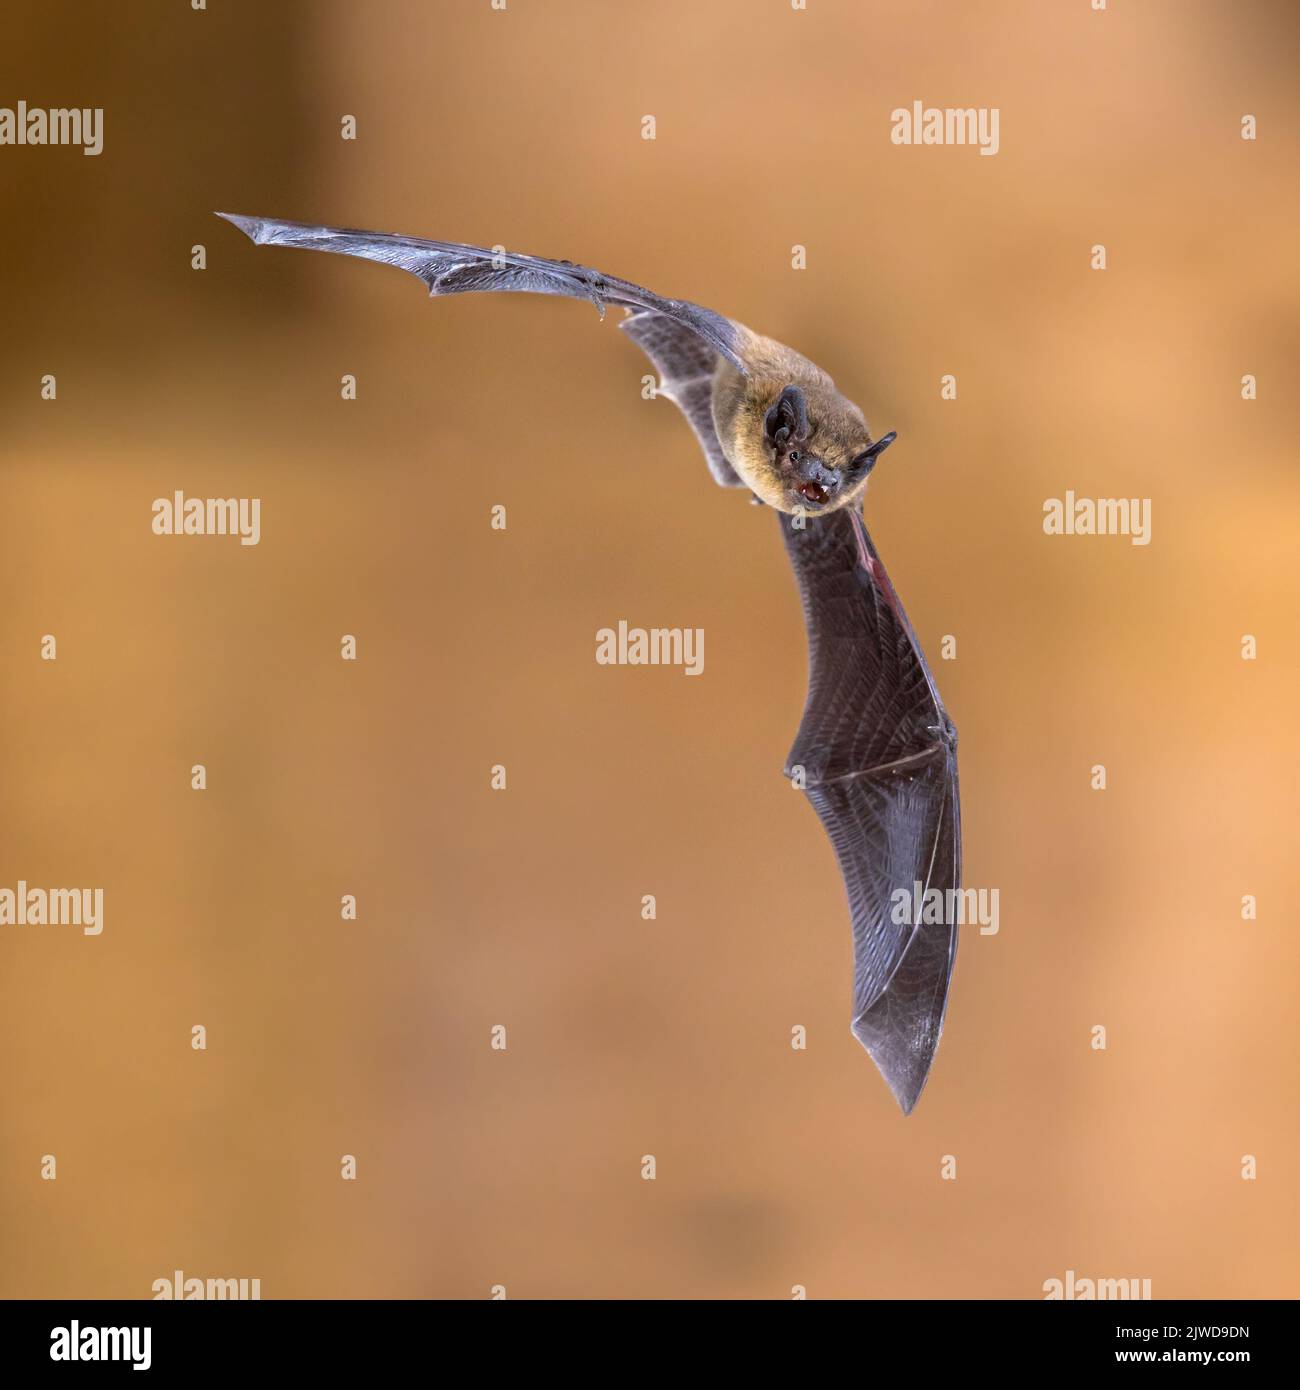 Flying pipistrelle bat (Pipistrellus pipistrellus) spectacular maneuver action shot on wooden attic of house with bright background Stock Photo